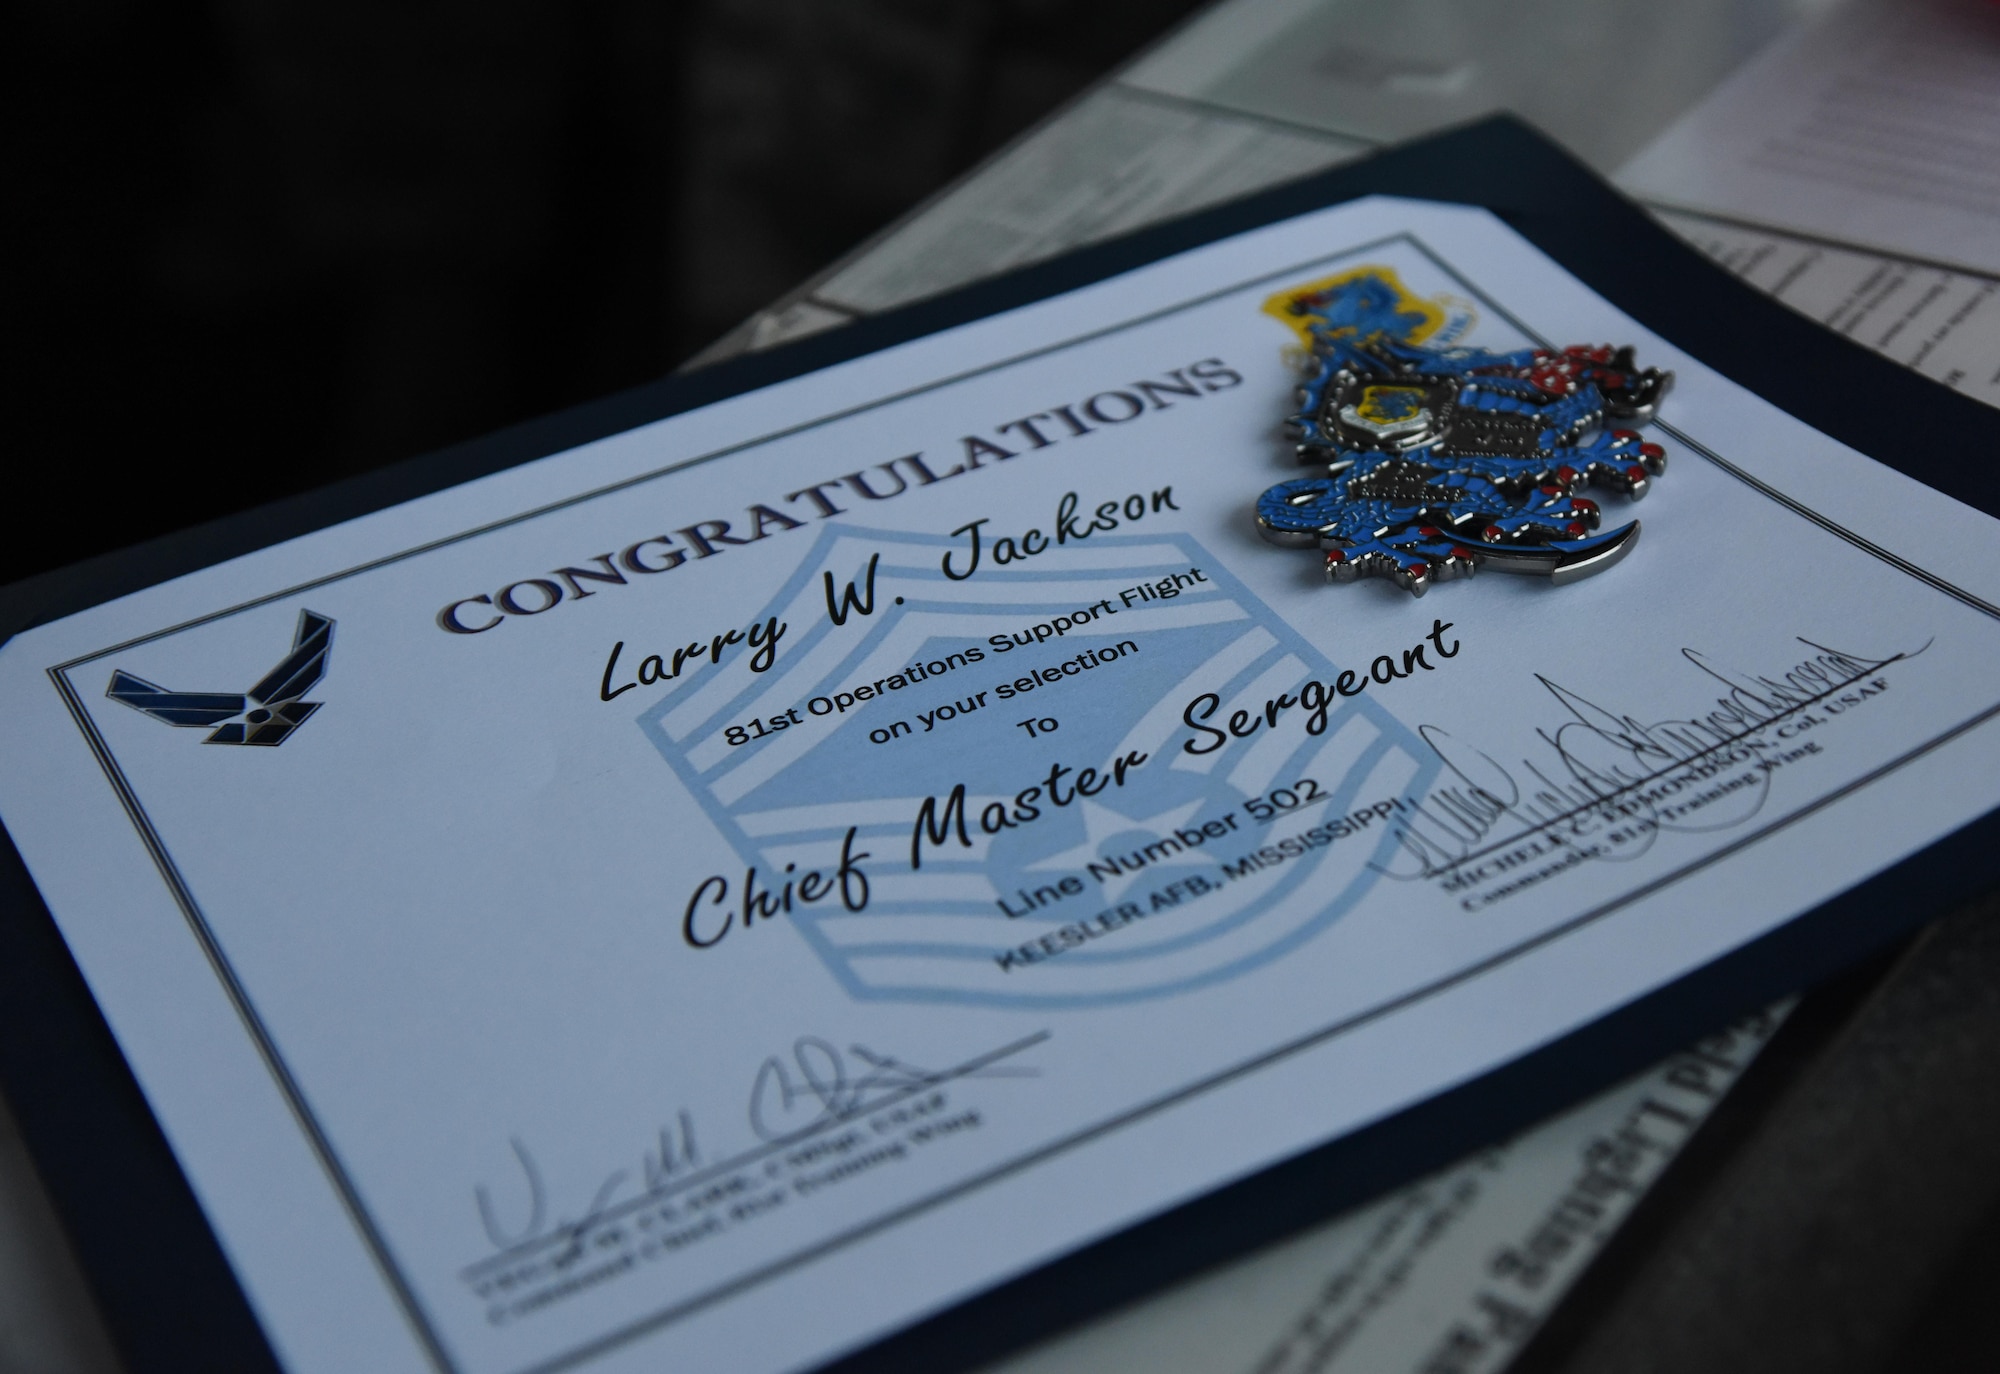 A promotion certificate for Senior Master Sgt. Larry Jackson, 81st Operations Support Flight superintendent, sits on display at the air traffic control tower Dec. 14, 2016, on Keesler Air Force Base, Miss. Base leadership visited the work centers of three Keesler senior NCOs to recognize and congratulate them for their selection to join the top 1 percent of the Air Force’s enlisted force. (U.S. Air Force photo by Kemberly Groue)